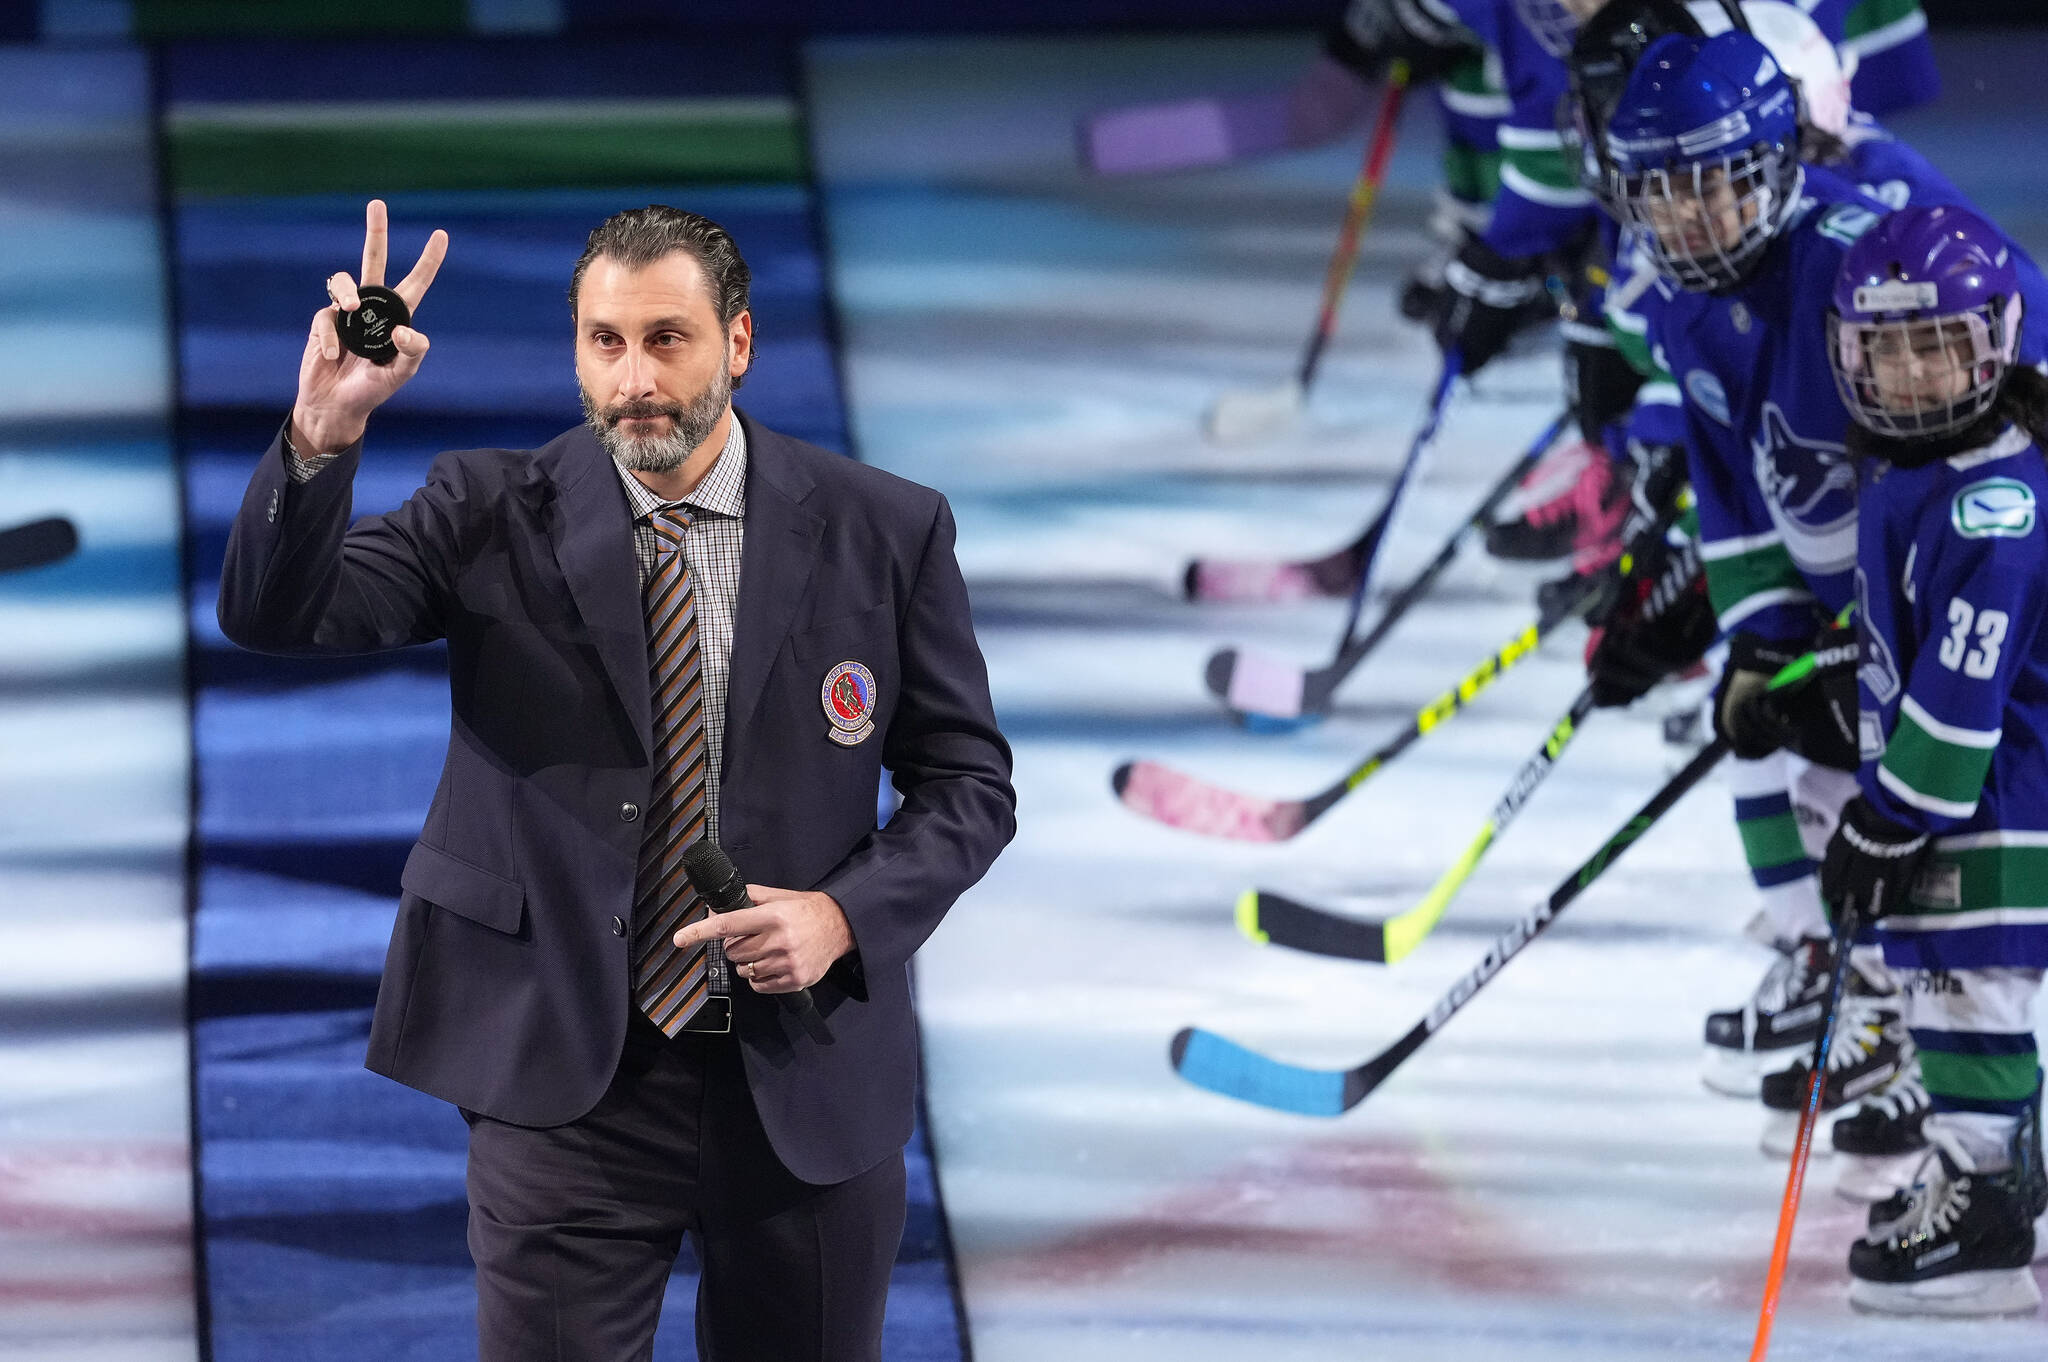 Former Vancouver Canucks goalie Roberto Luongo waves as he walks onto the ice to be honoured with other Hockey Hall of Fame inductees, Daniel and Henrik Sedin, before an NHL hockey game in Vancouver, on Thursday, December 1, 2022. THE CANADIAN PRESS/Darryl Dyck